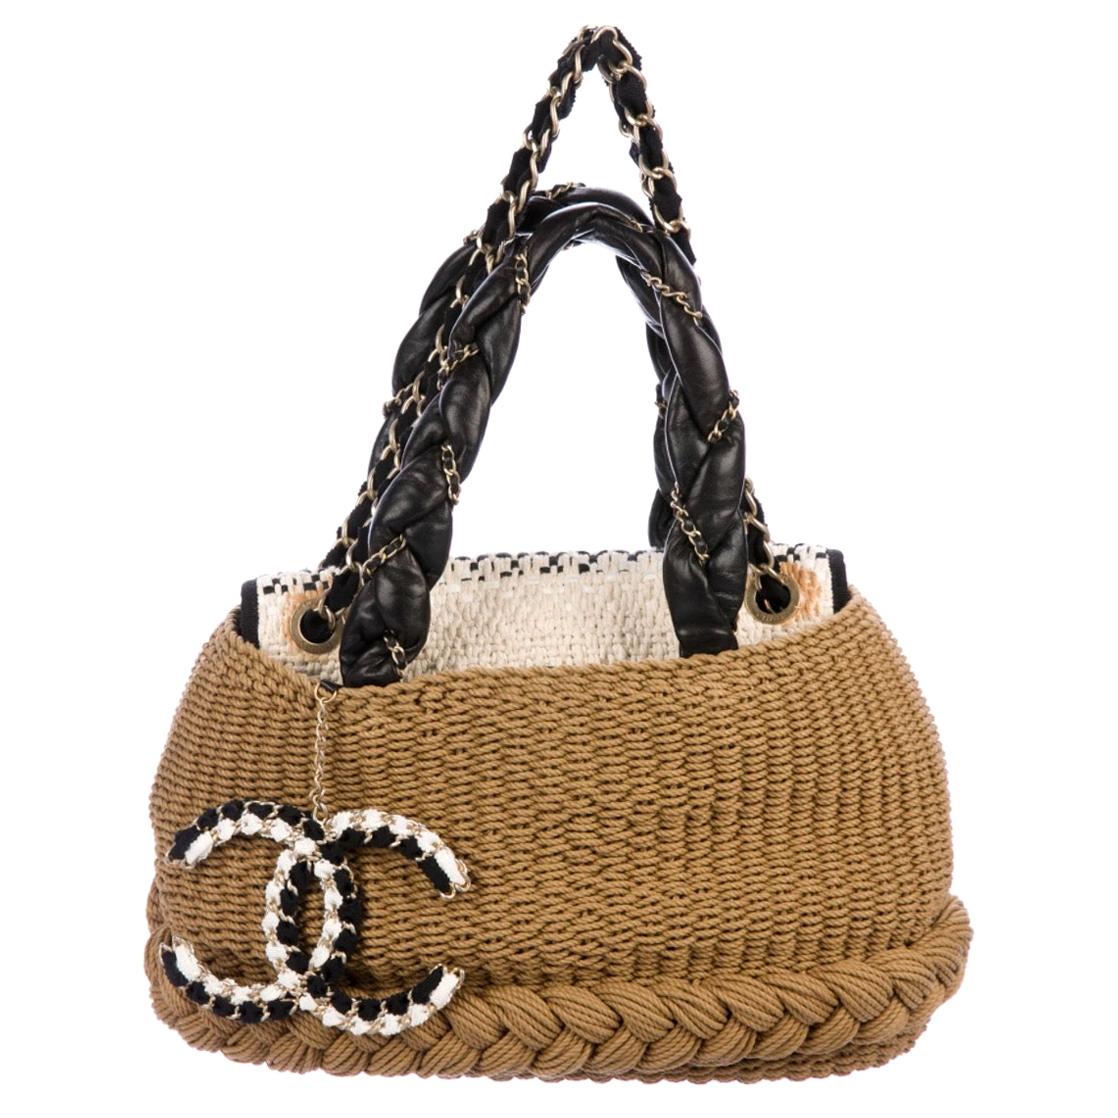 Chanel Tan Woven Tweed Leather Chain Charm Beach Travel Shoulder Tote Bag